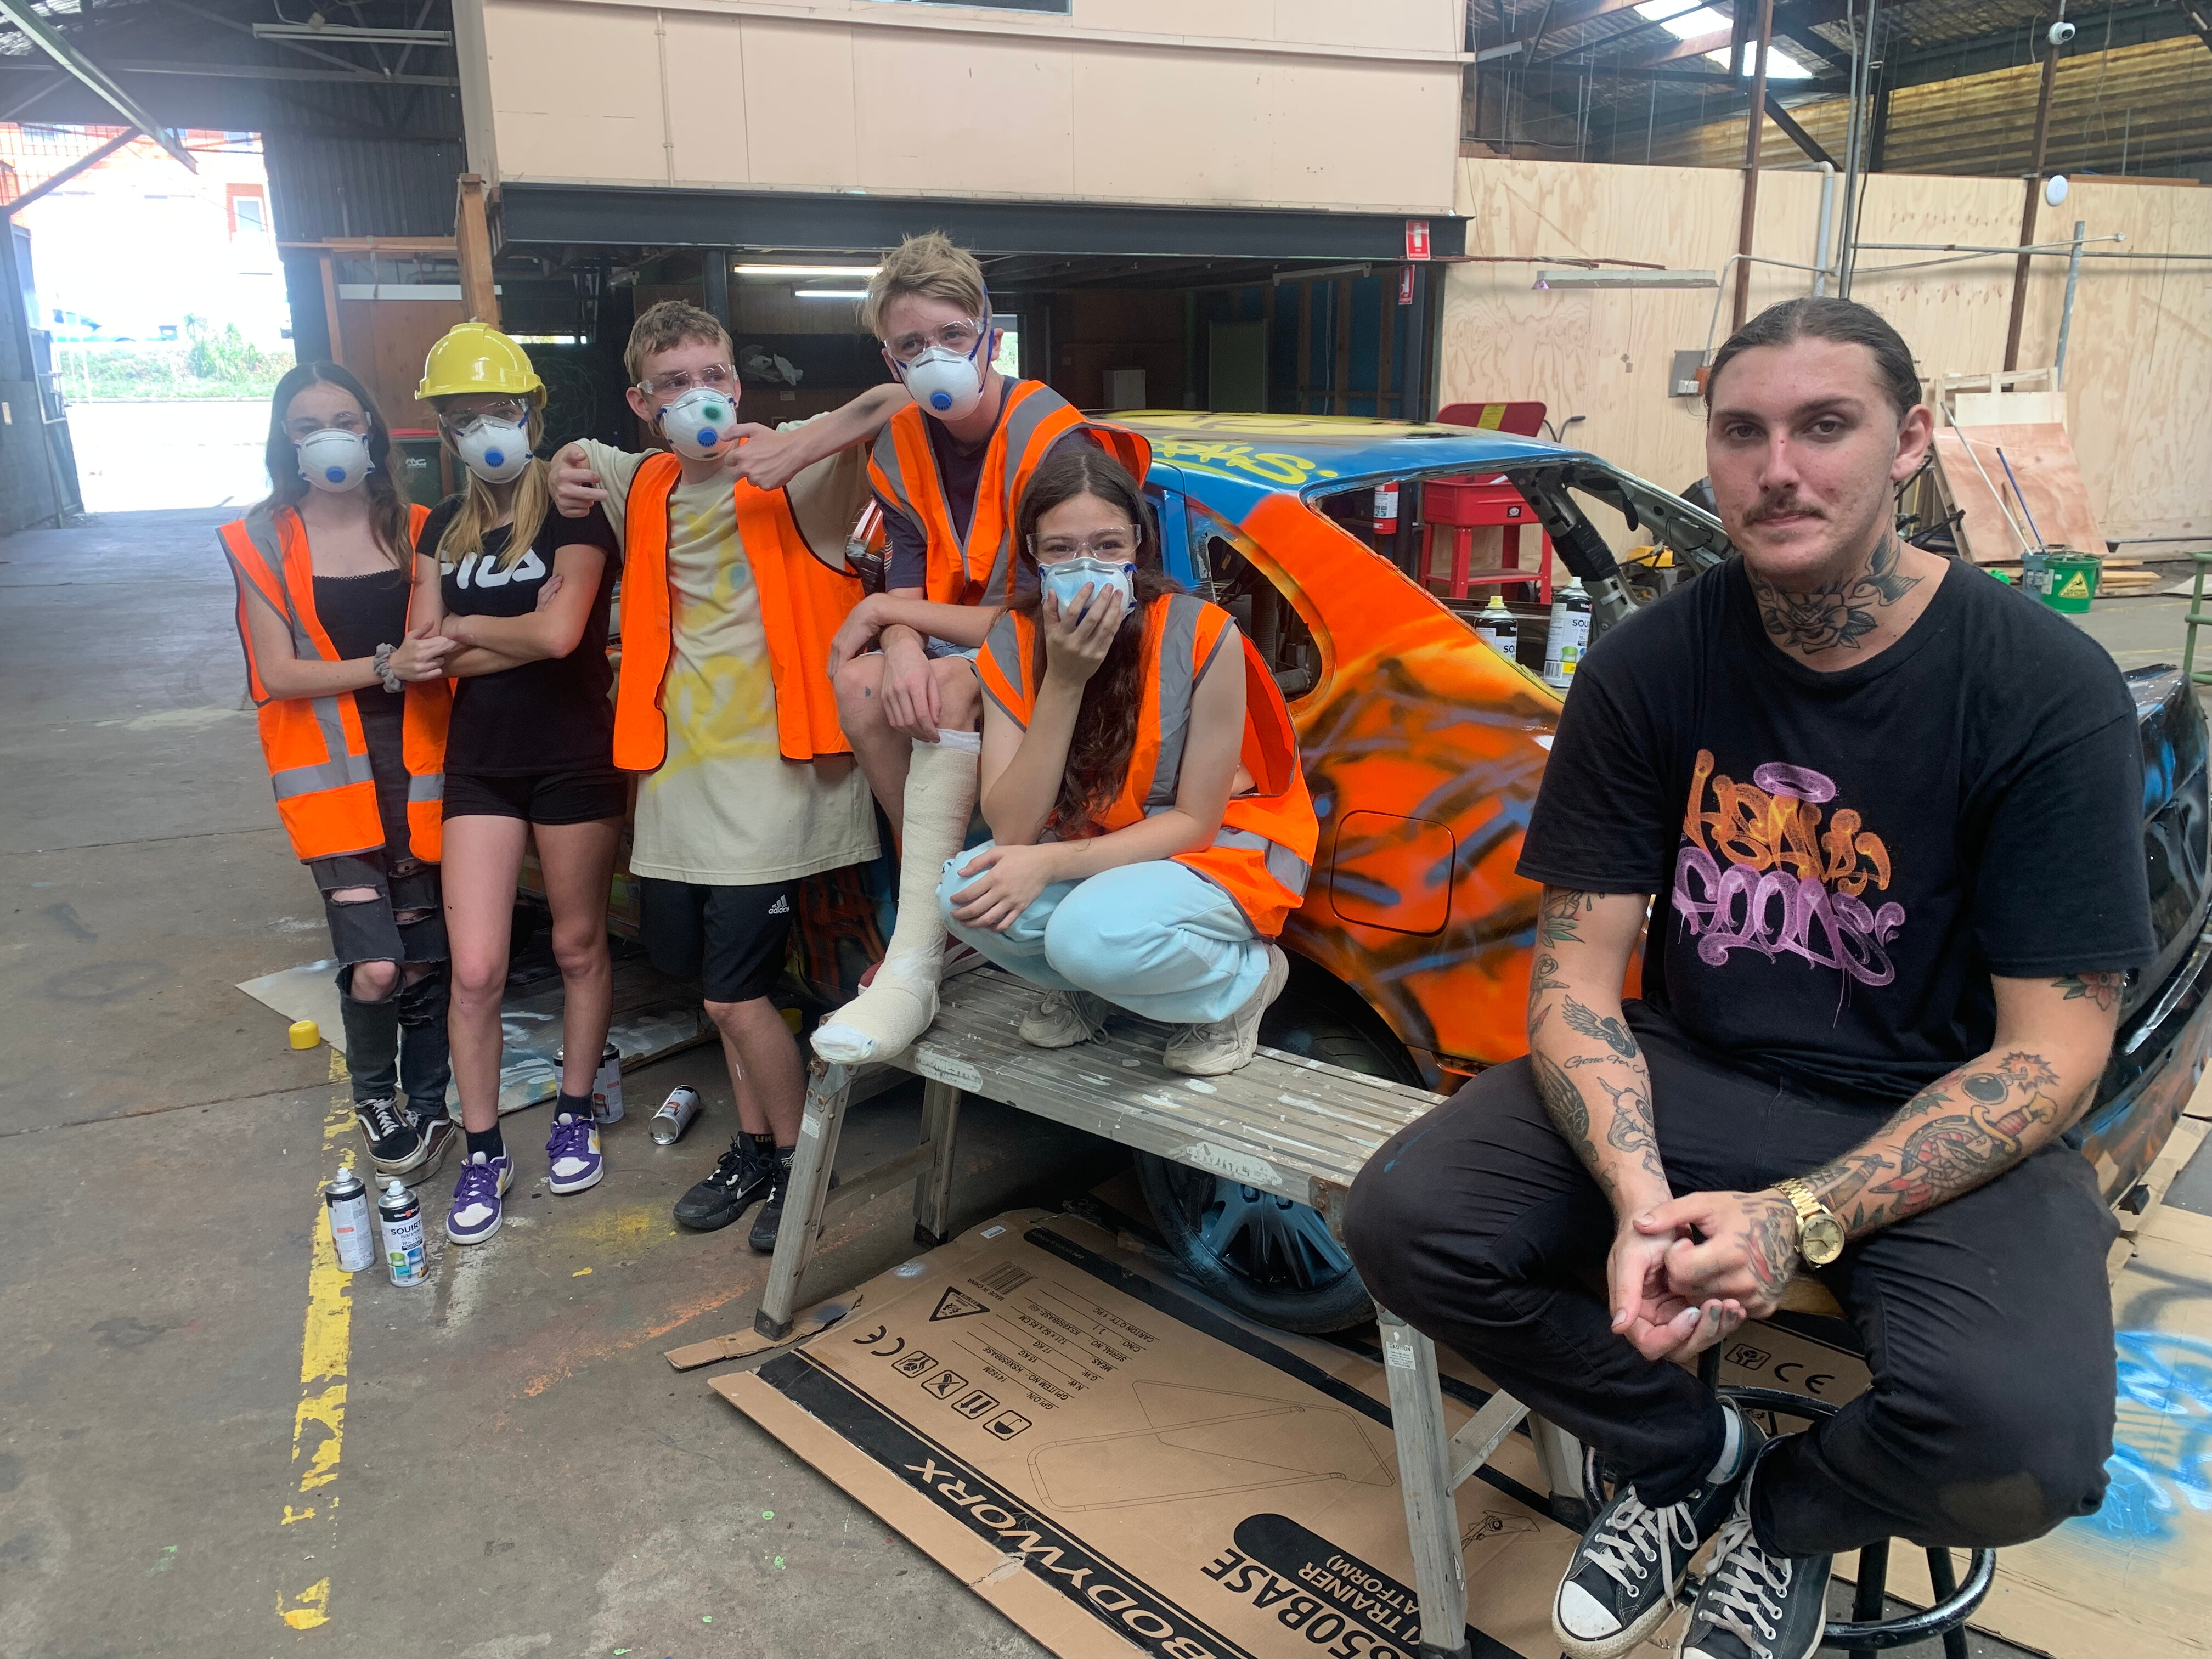 Five students in masks and hi-vis vests and a young man sit in front of a colourful spray-painted car in a shed.